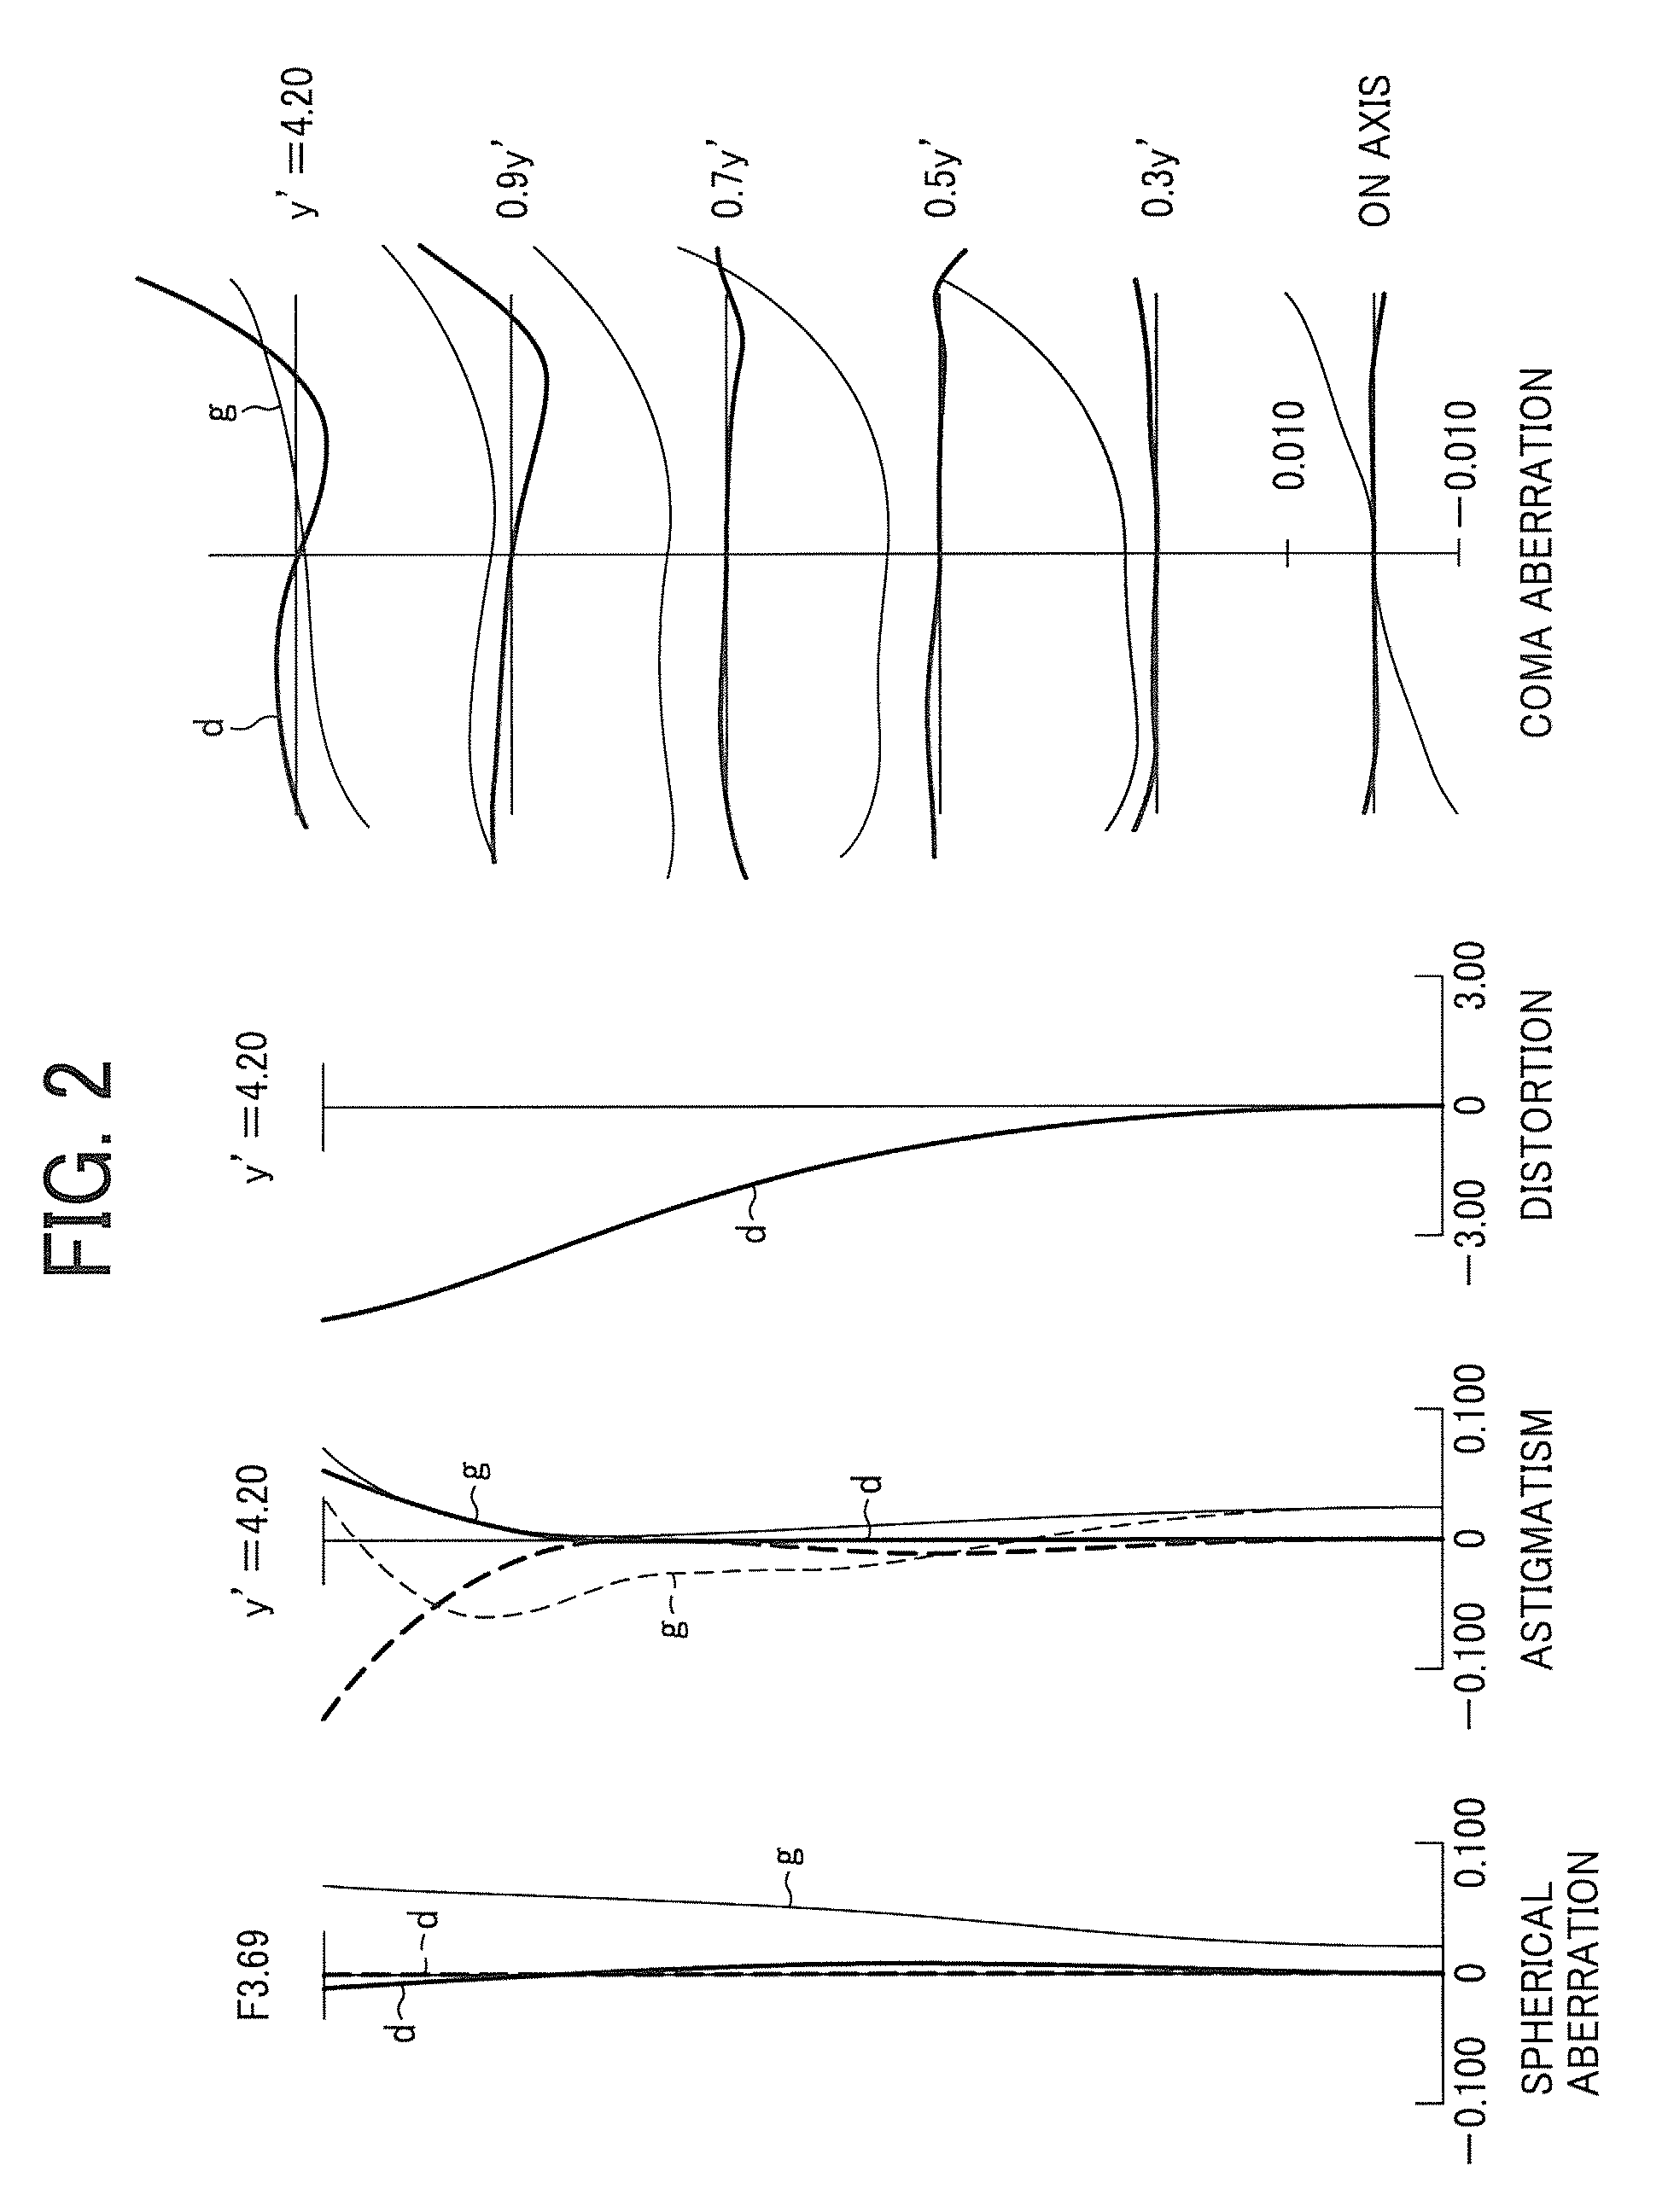 Zoom lens, imaging apparatus, and personal data assistant